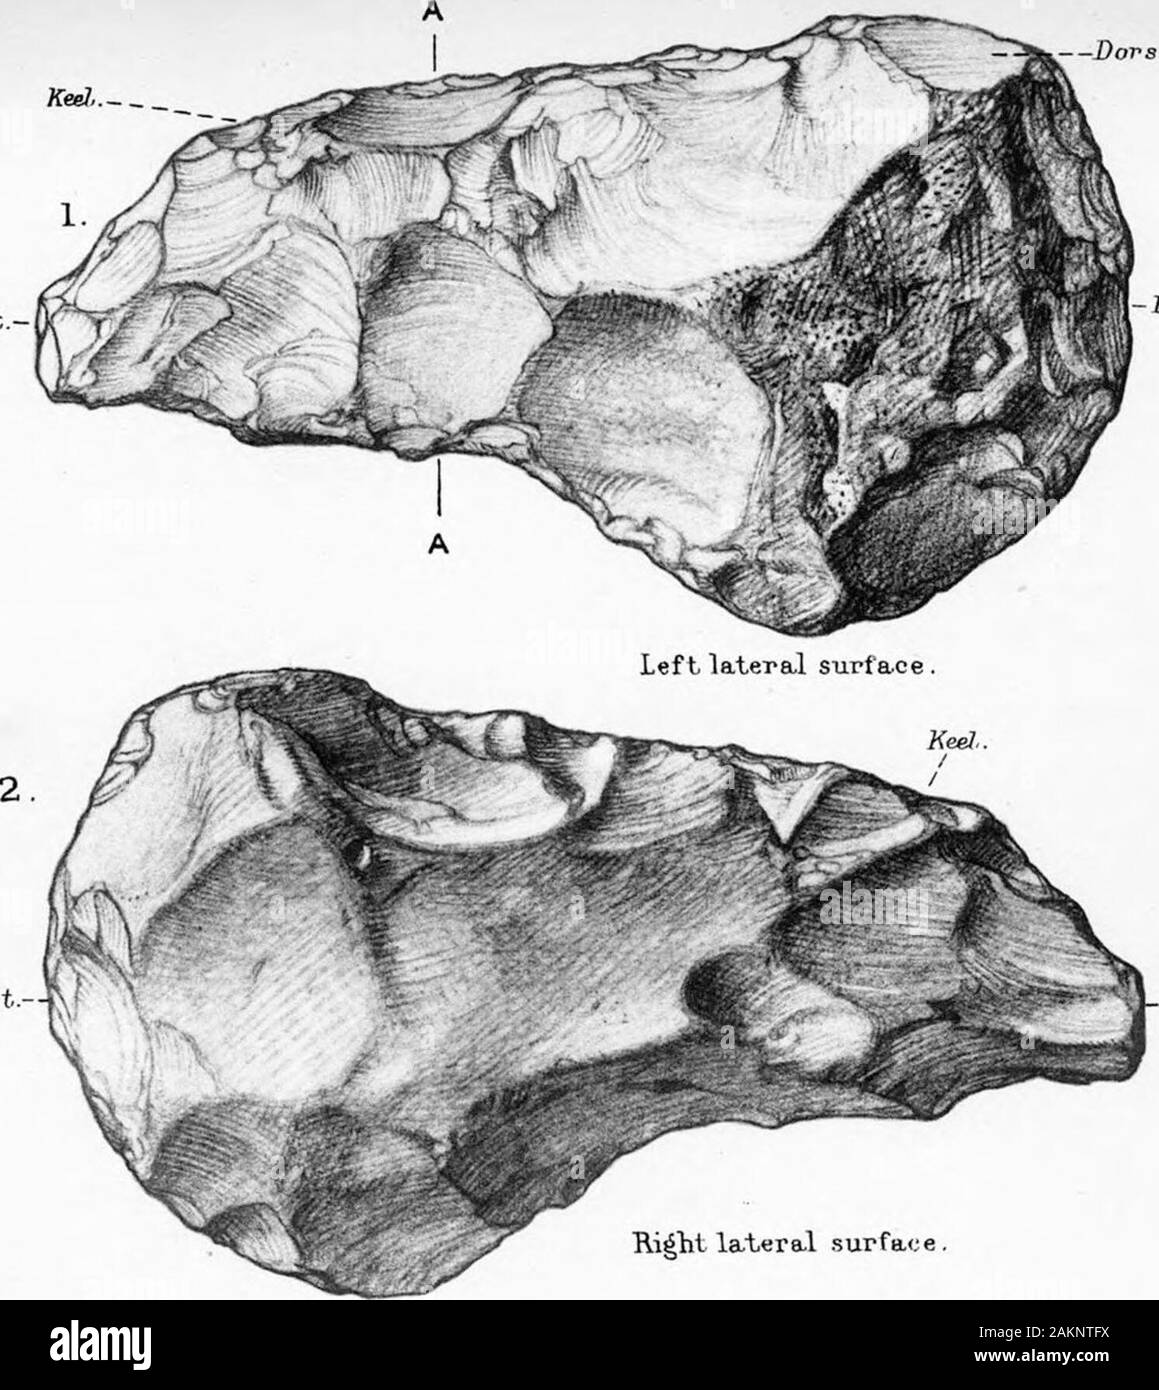 https://c8.alamy.com/comp/2AKNTFX/the-transition-from-rostro-carinate-flint-implements-to-the-tongue-shaped-implements-of-river-terrace-gravels-poktventra1-surface-post-dorsal-aurfact-plate-5284100-actual-sizeanother-specimen-from-same-gravel-pit-as-above-also-found-and-presented-byrev-h-g-o-kendall-positions-of-sections-indicated-by-vertical-lines-in-fig-1-dorsal-platform-a-nt-2AKNTFX.jpg